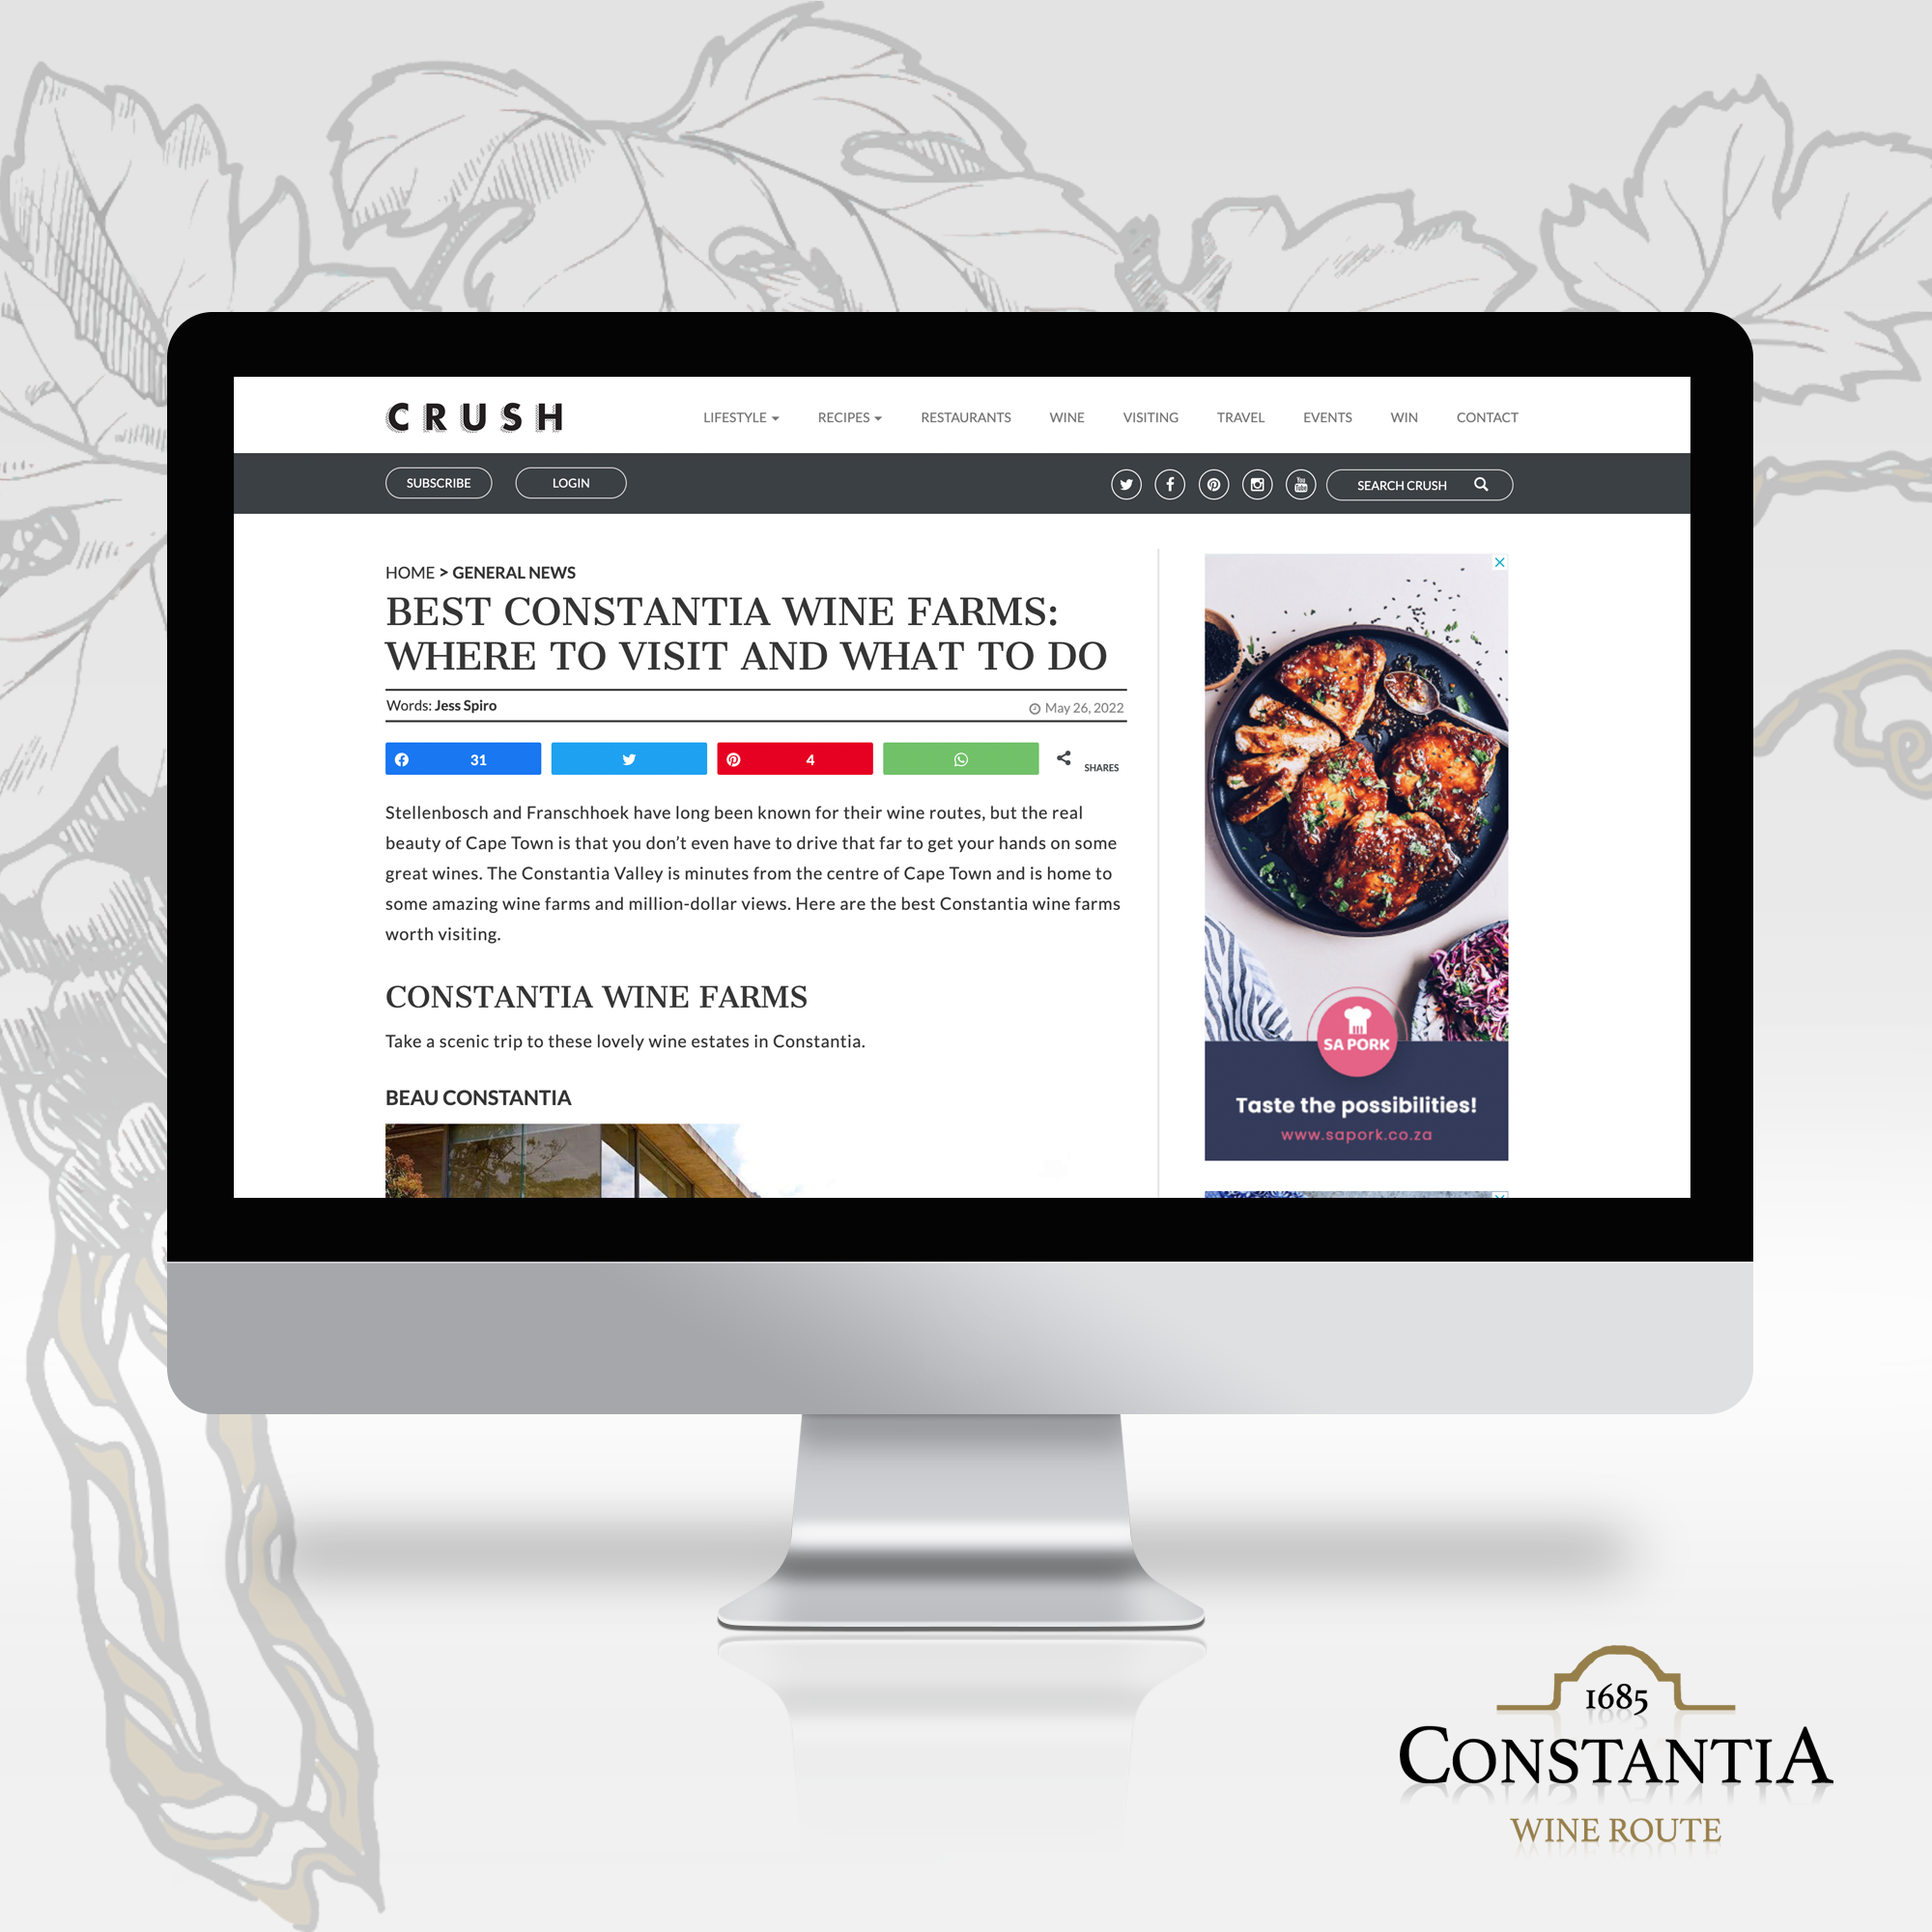 Featured image for “Best Constantia Wine Farms: Where to visit and what to do”